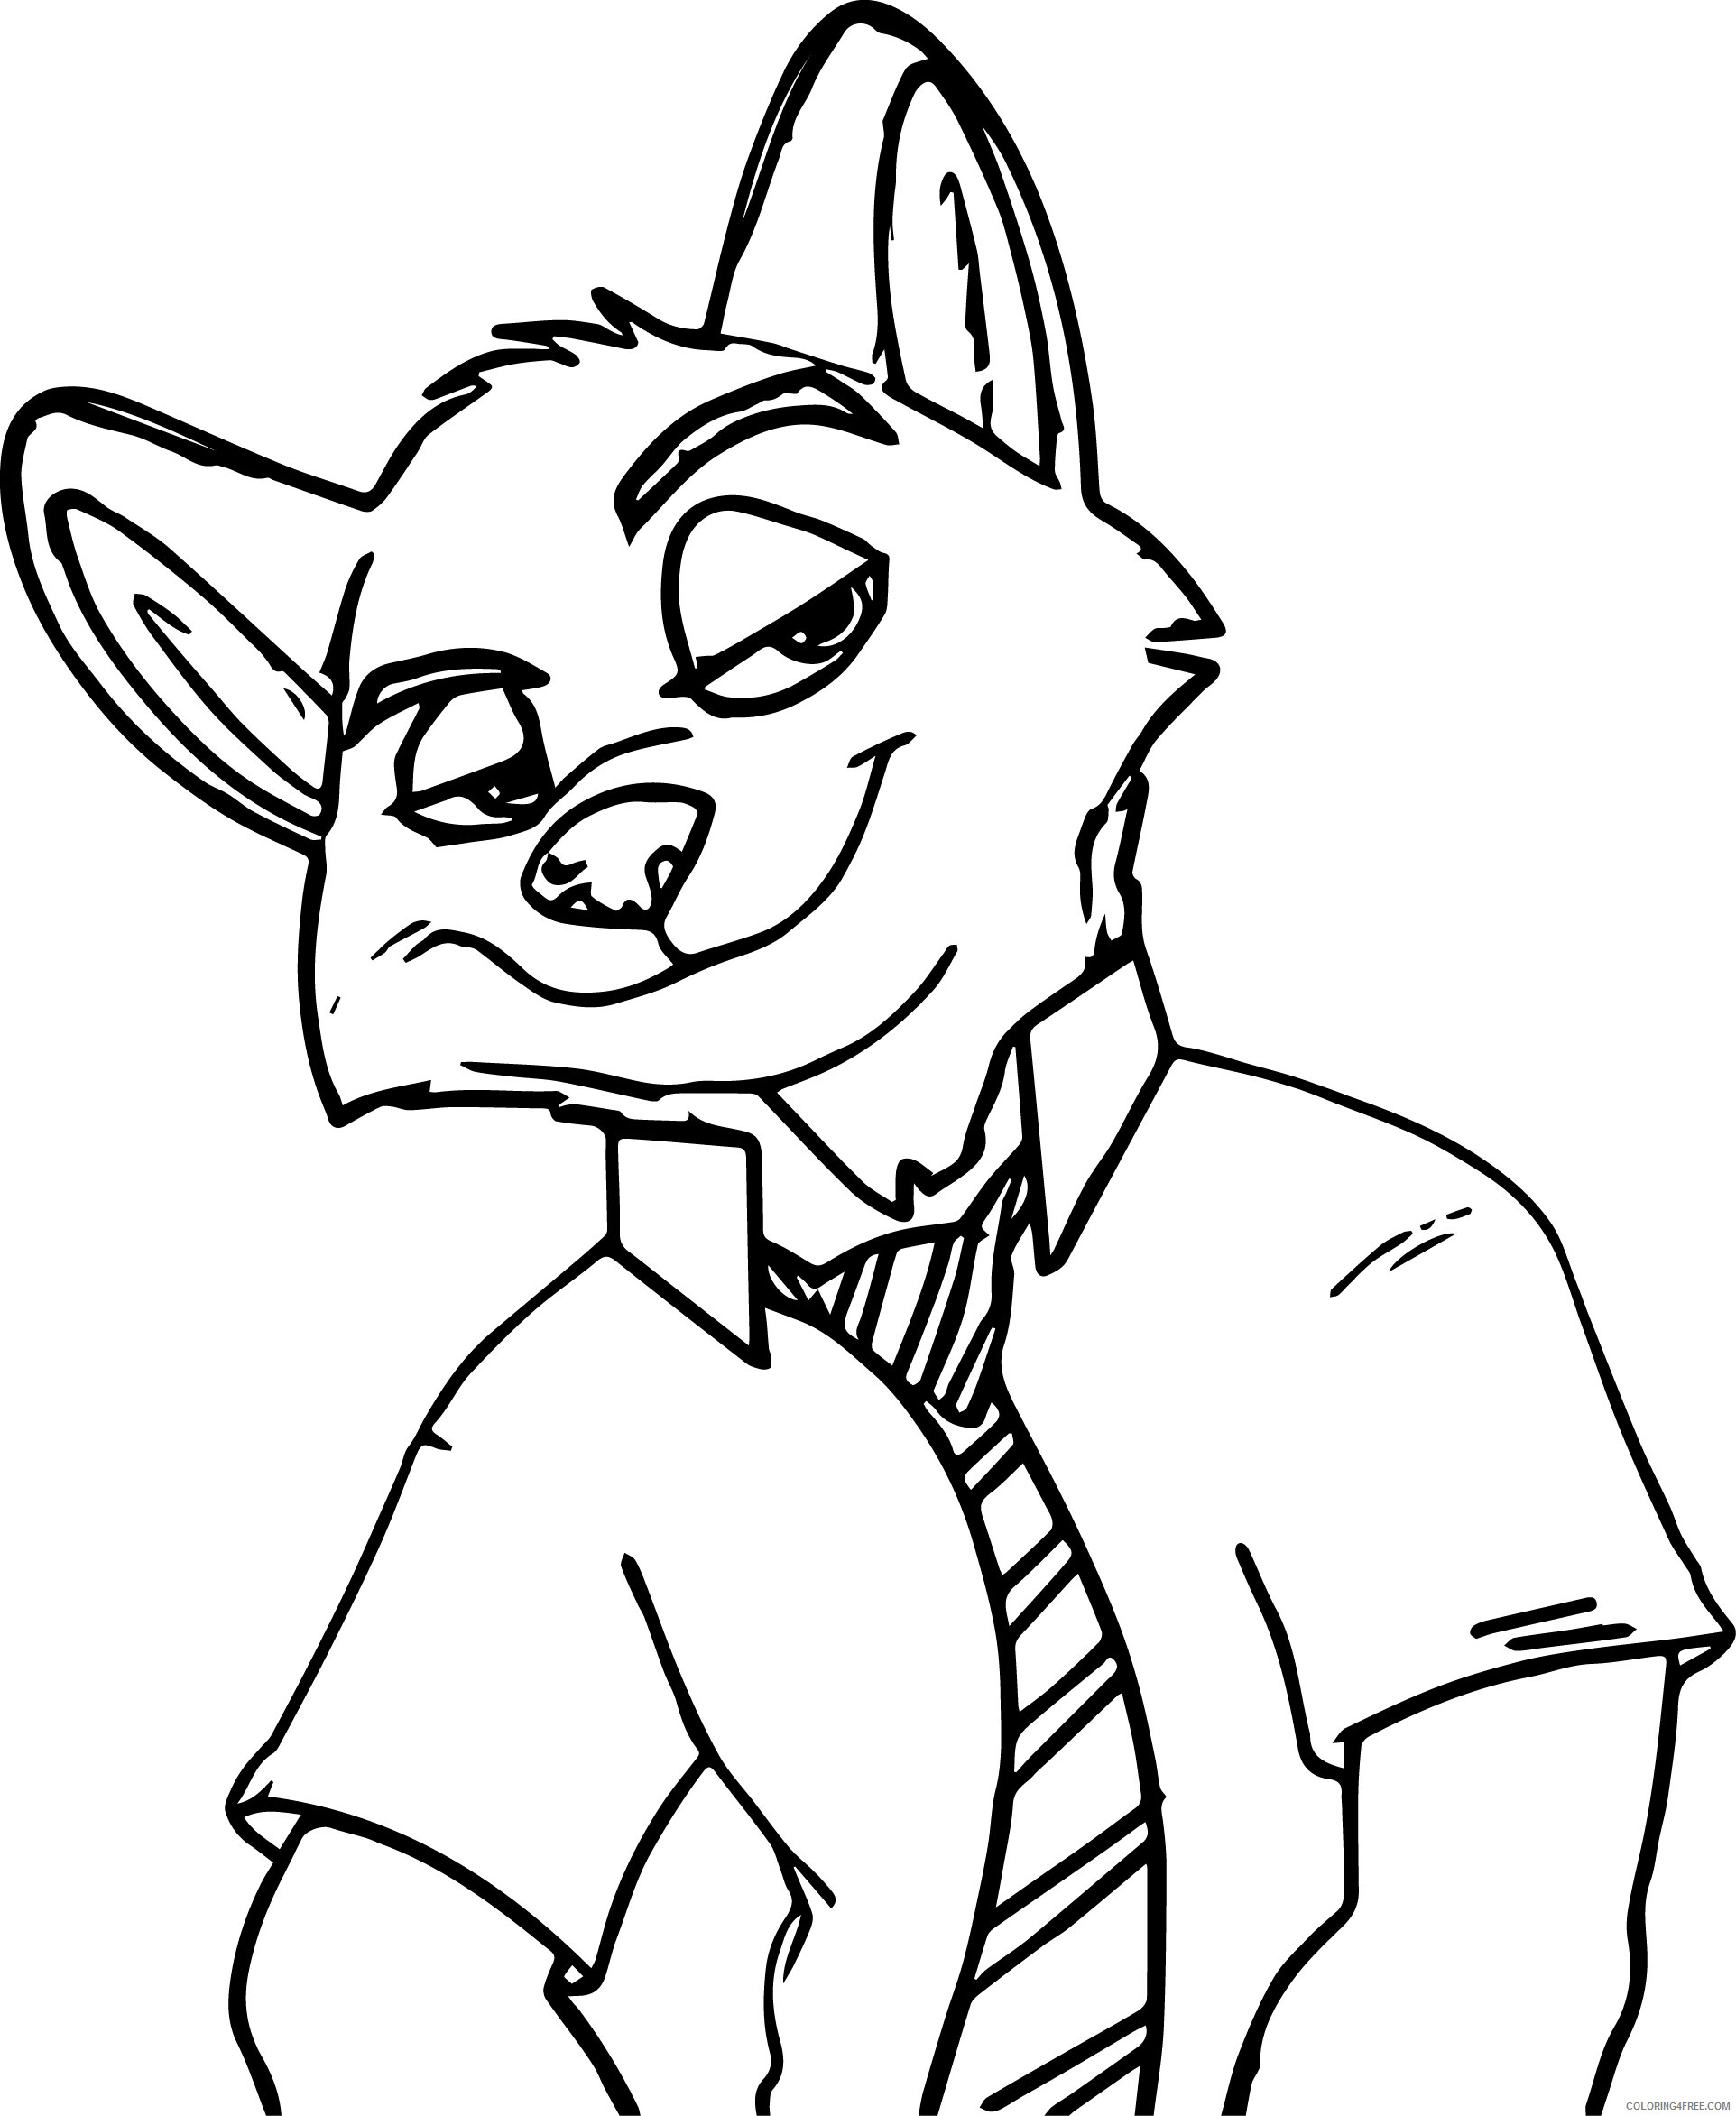 Zootopia Coloring Pages TV Film nick wilde fox Printable 2020 11967 Coloring4free